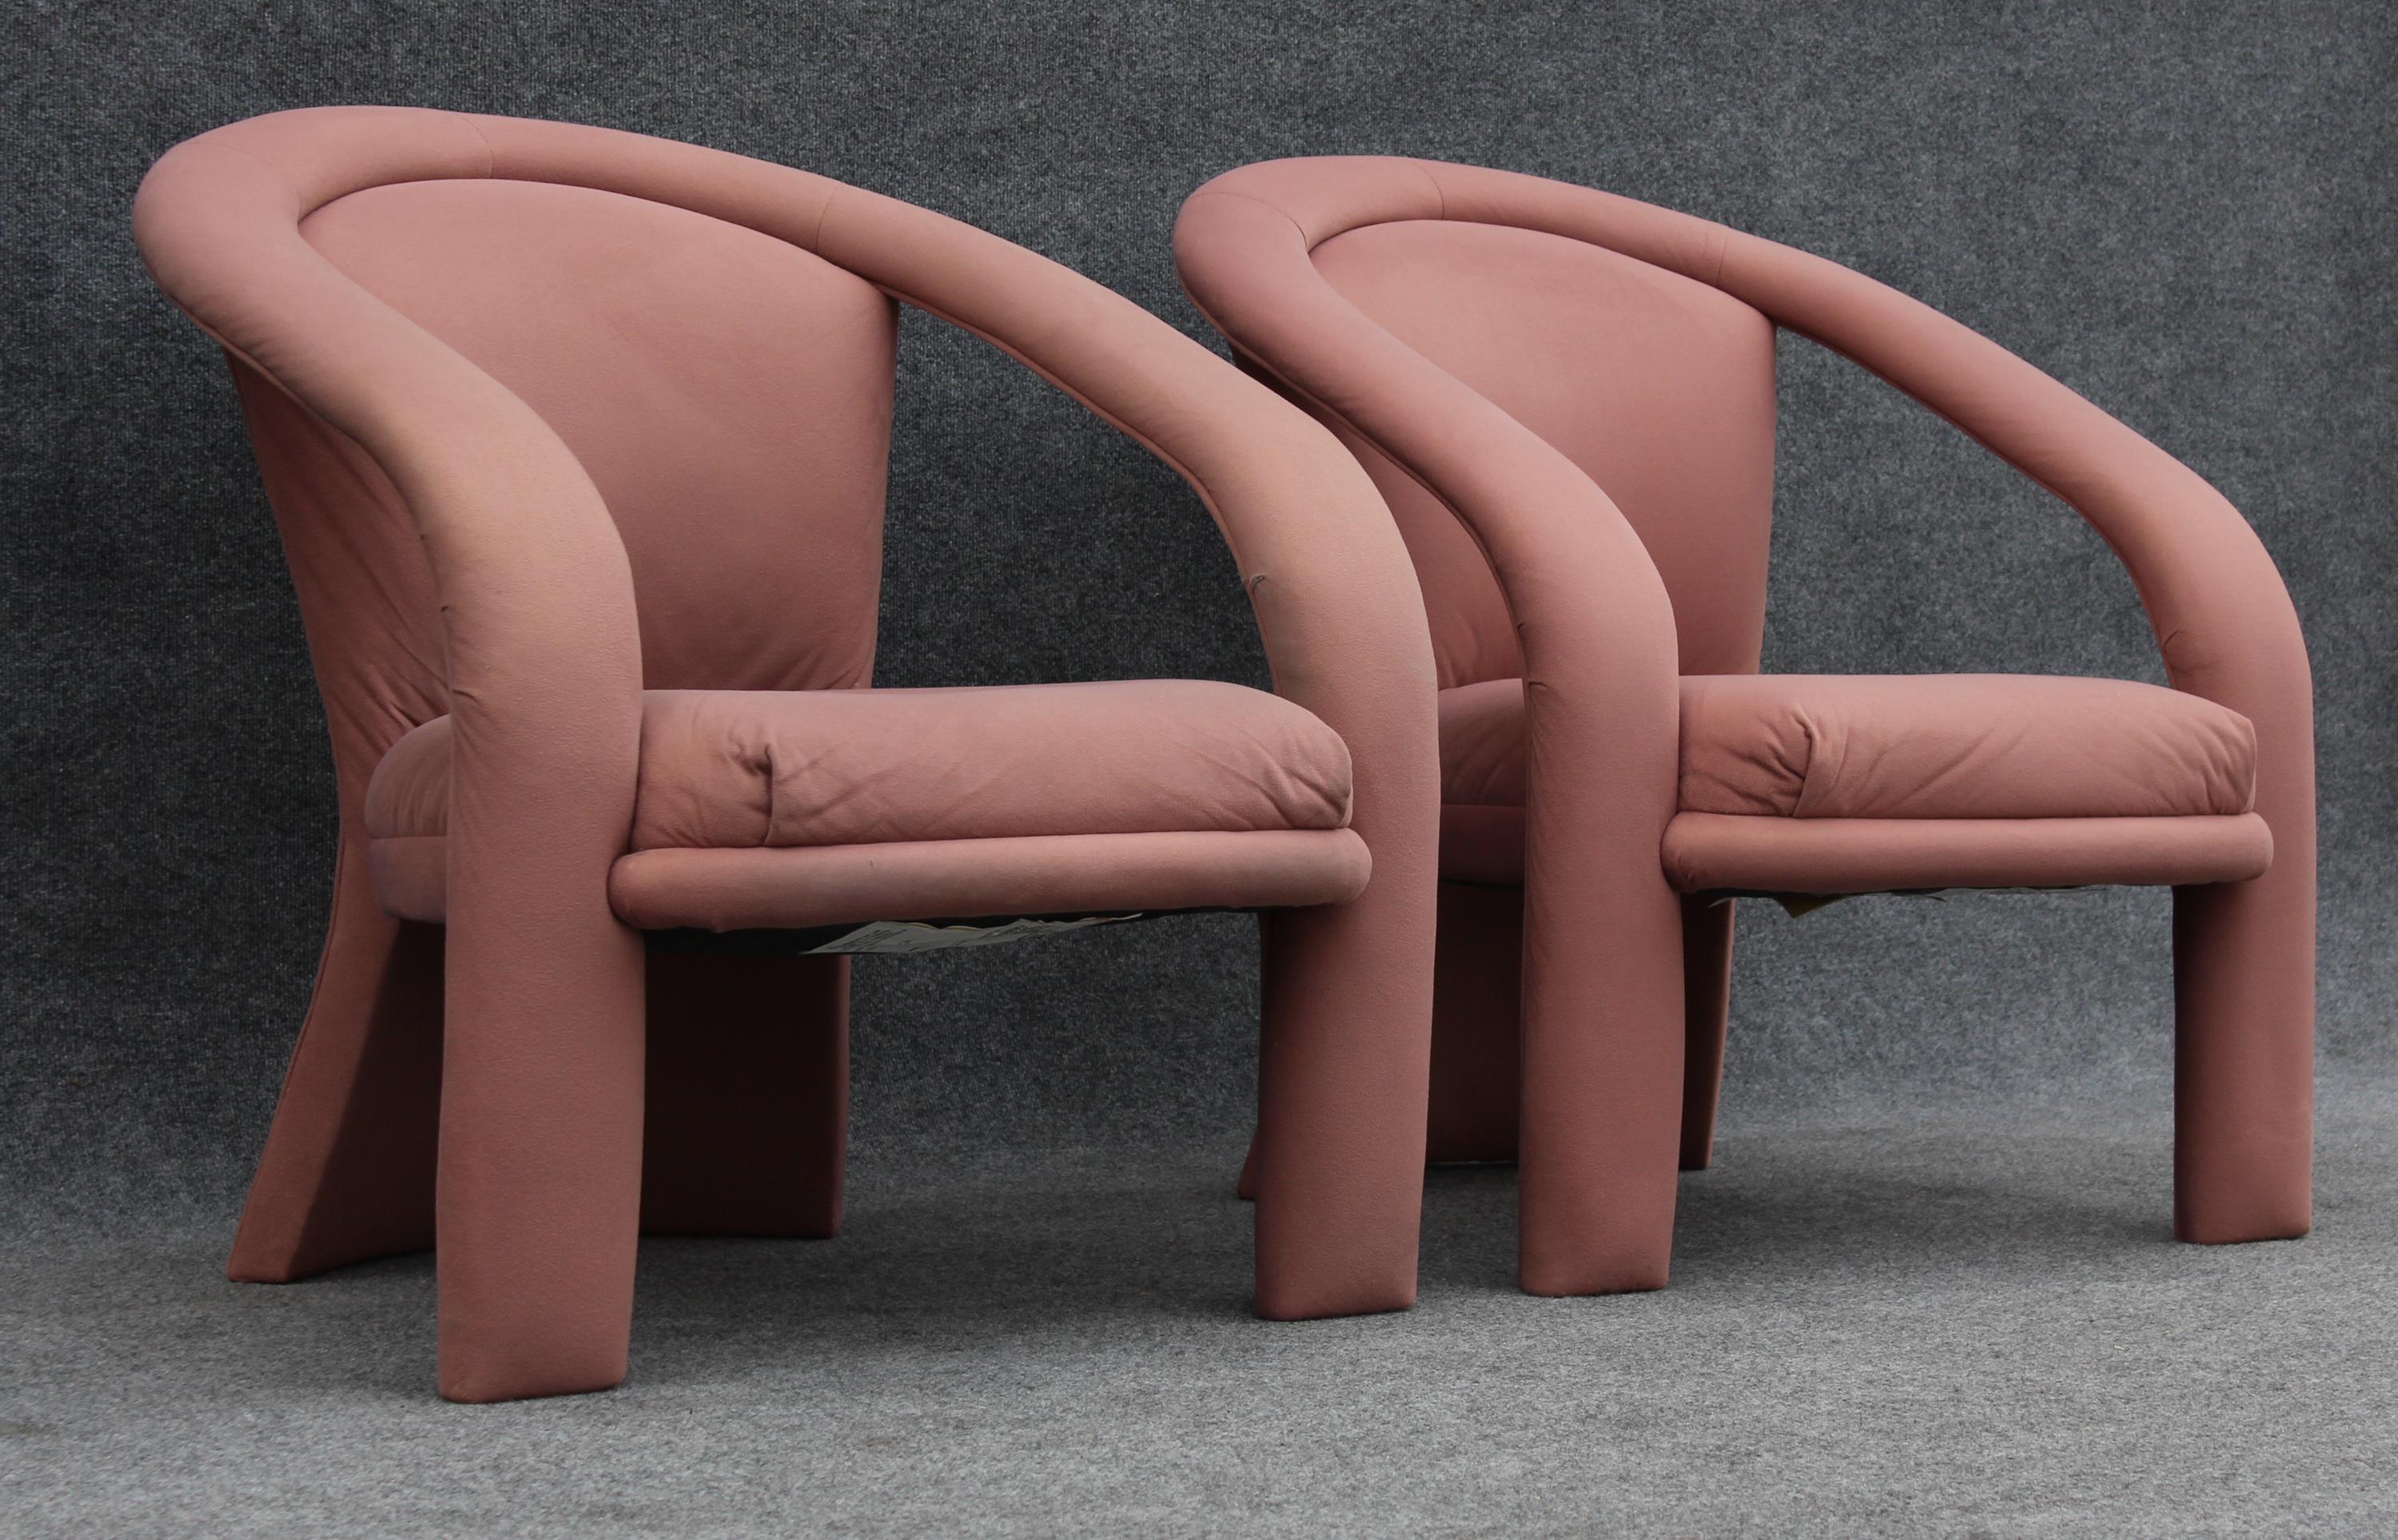 Pair of Pink Suede Sculptural Ribbon Armchairs or Lounge Chairs by Marge Carson In Good Condition For Sale In Philadelphia, PA